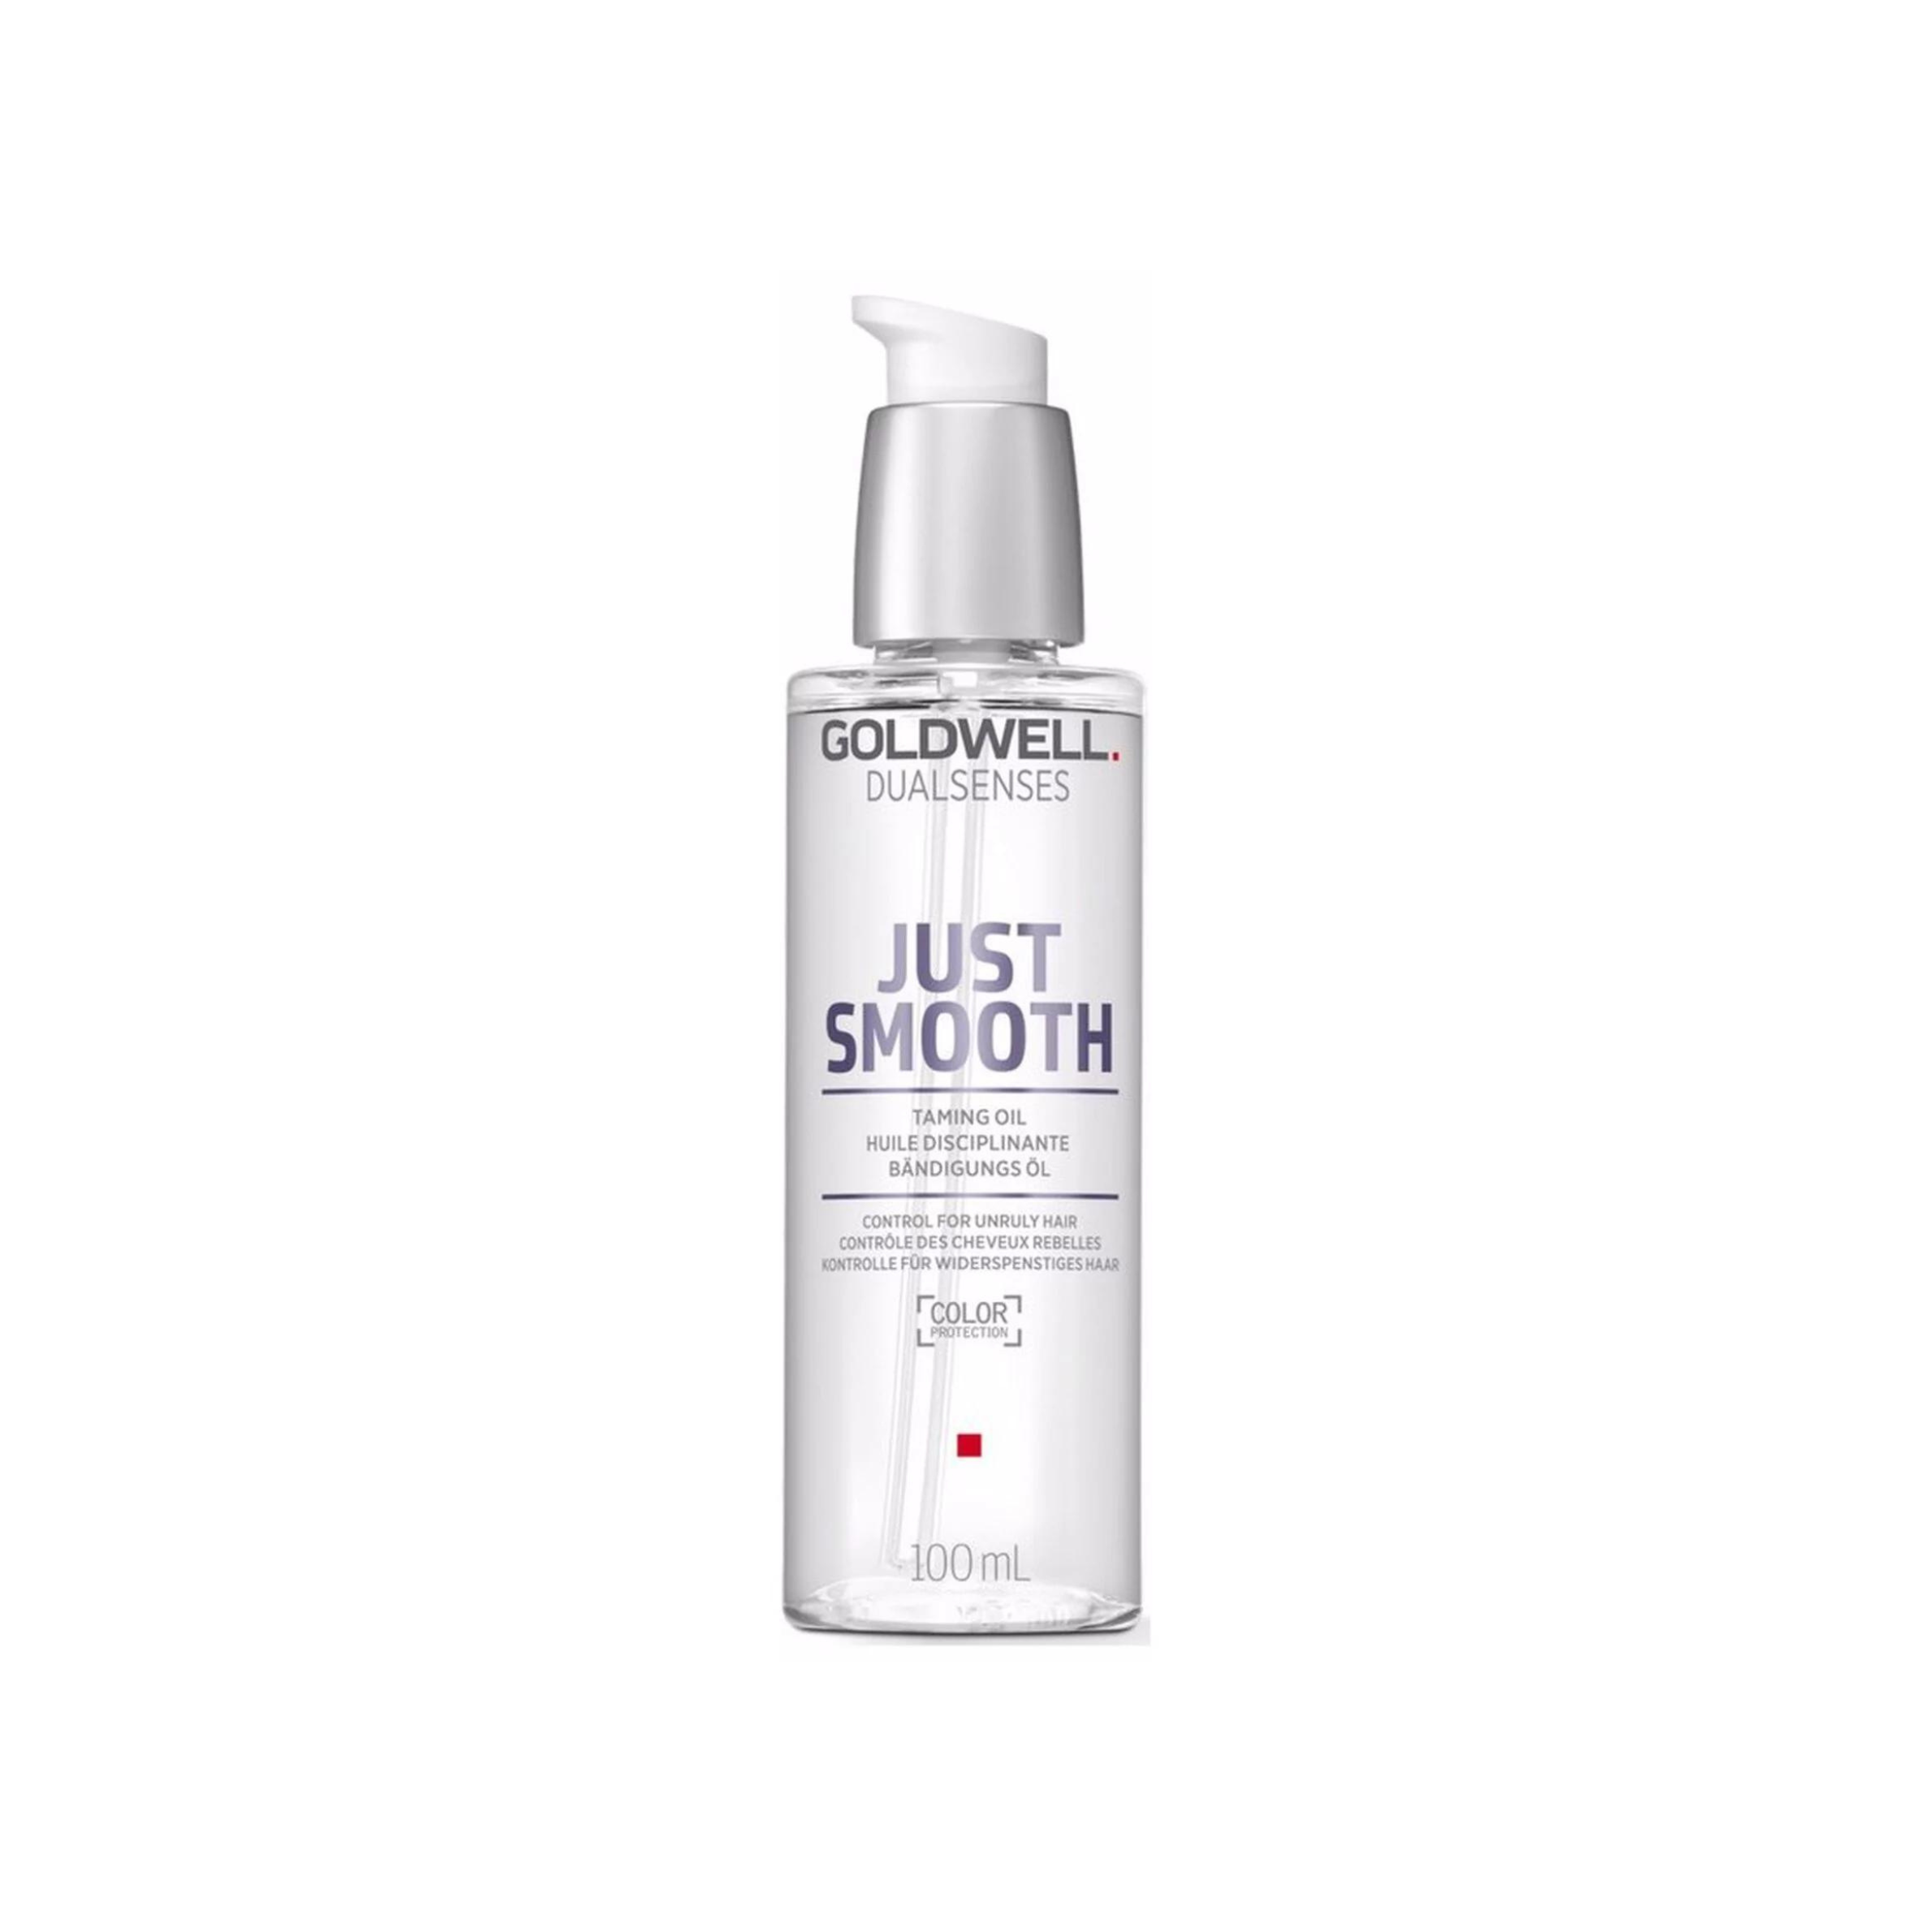 Goldwell Just Smooth Taming Oil